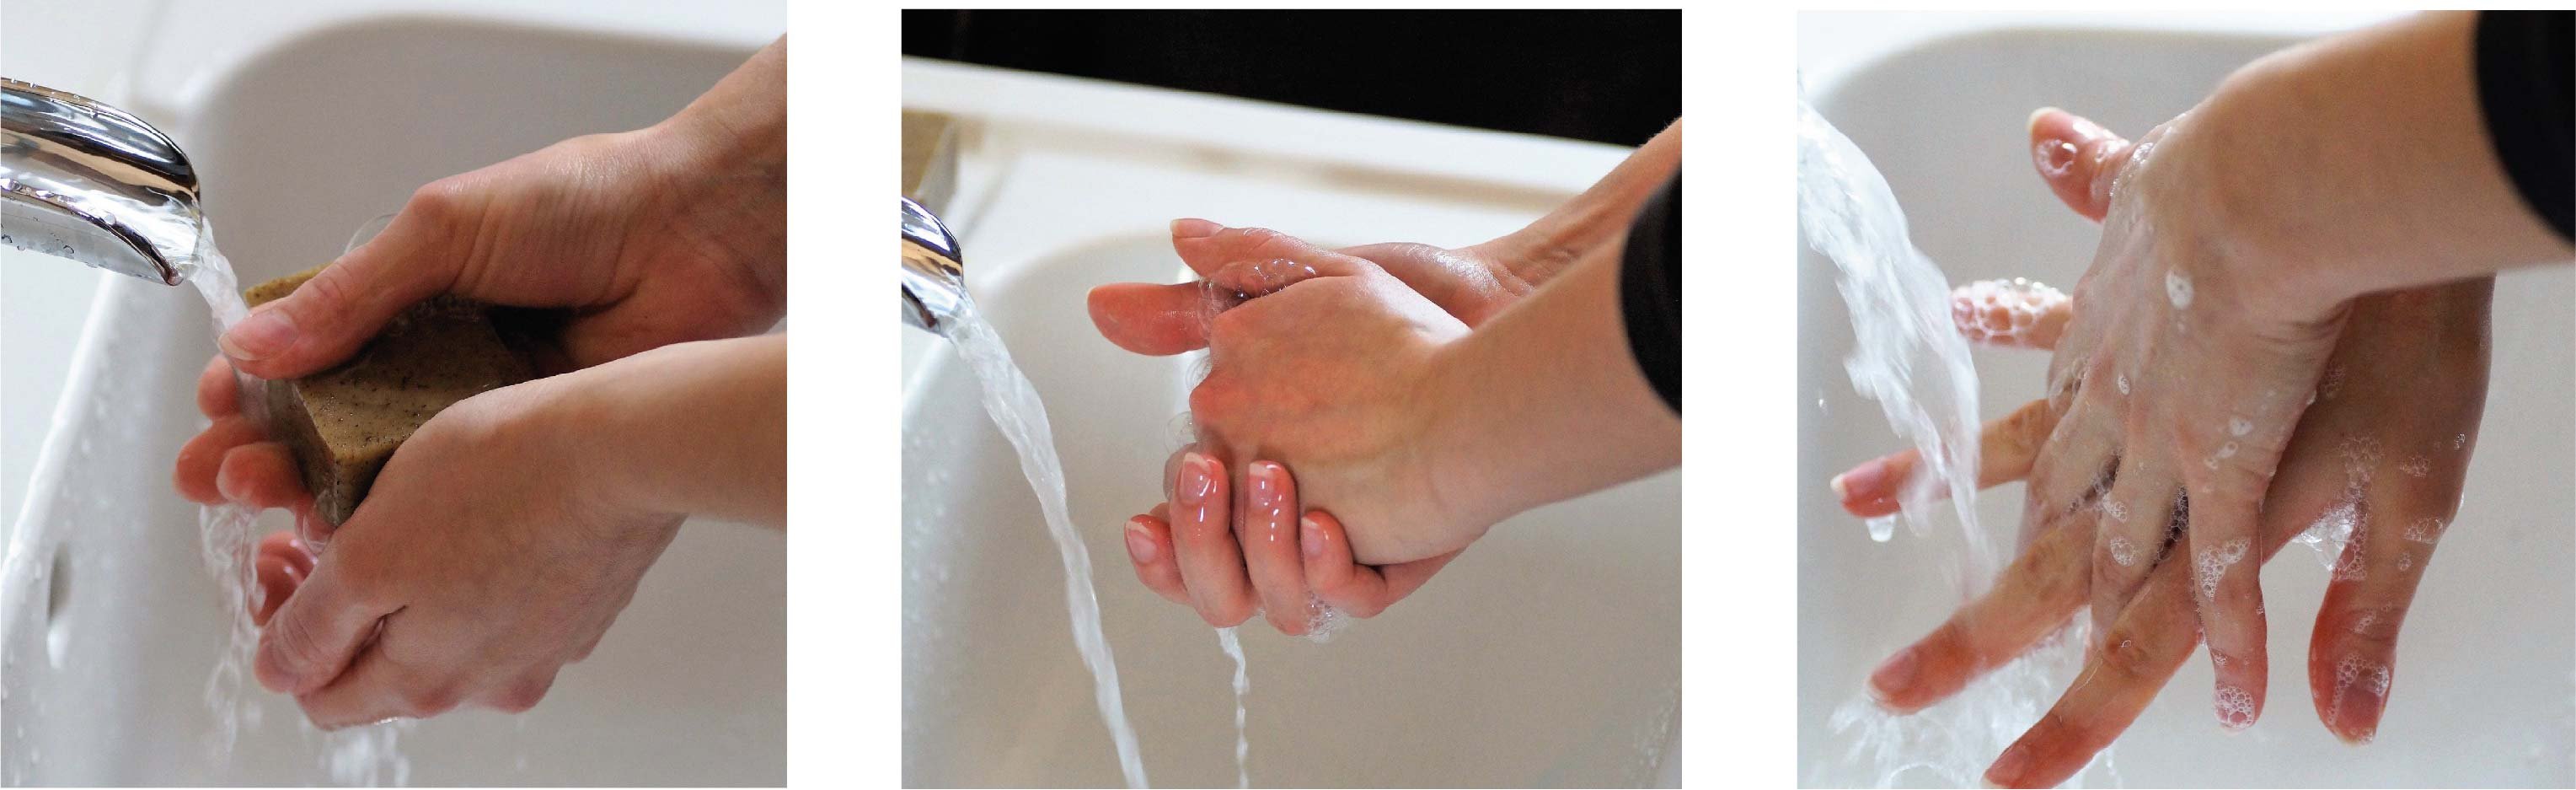 Medical Tips and Guidelines - Hand Washing